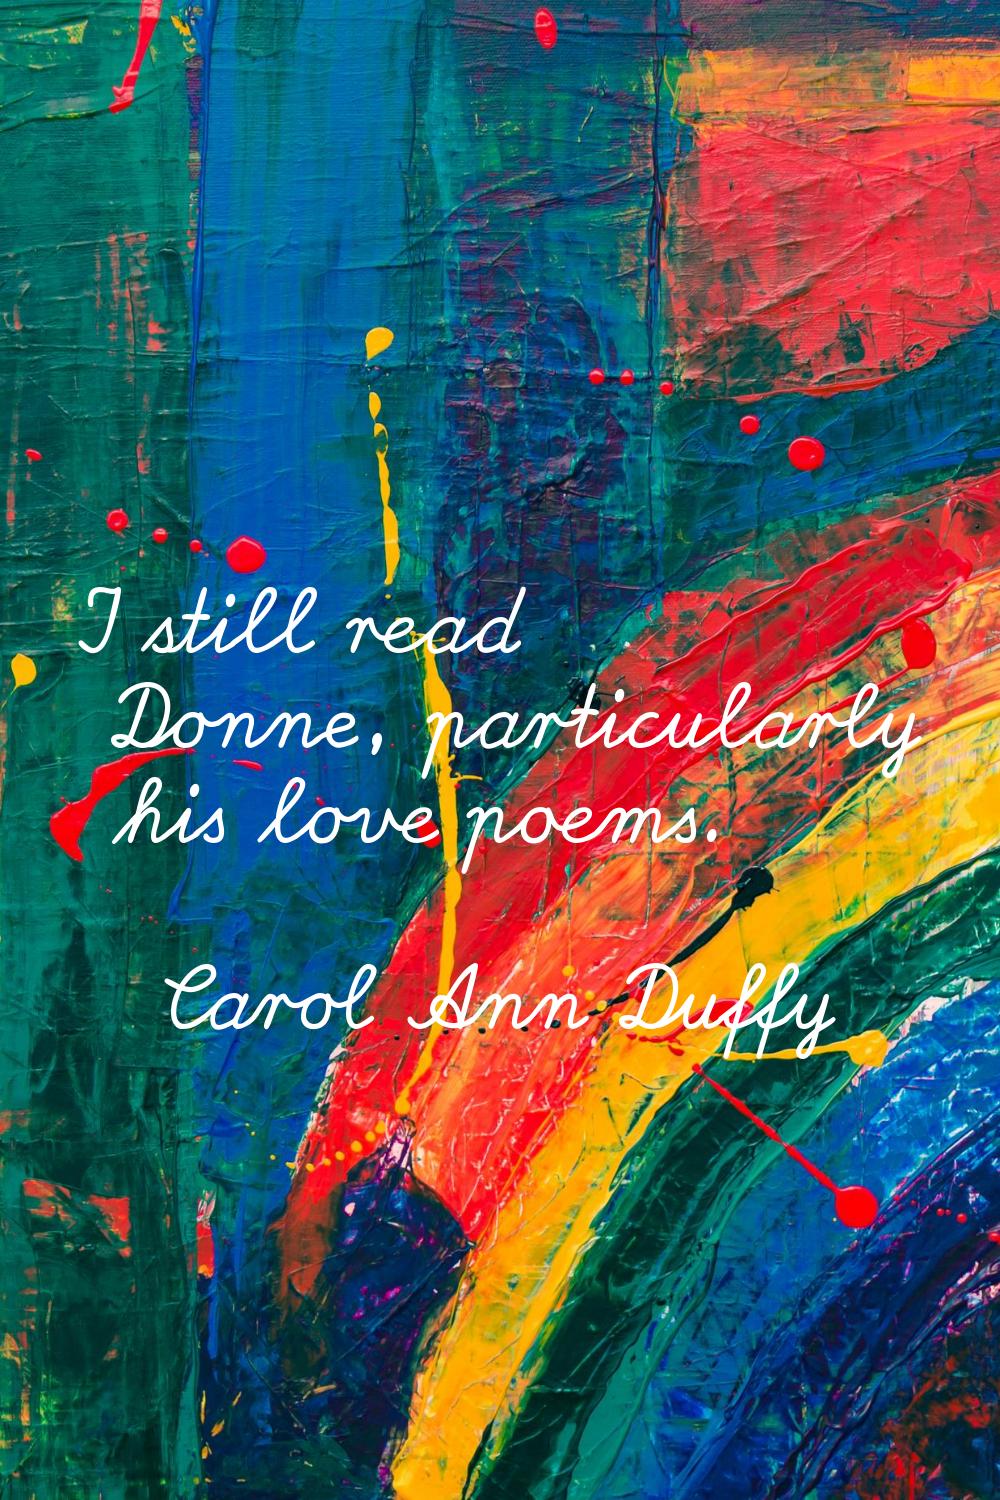 I still read Donne, particularly his love poems.